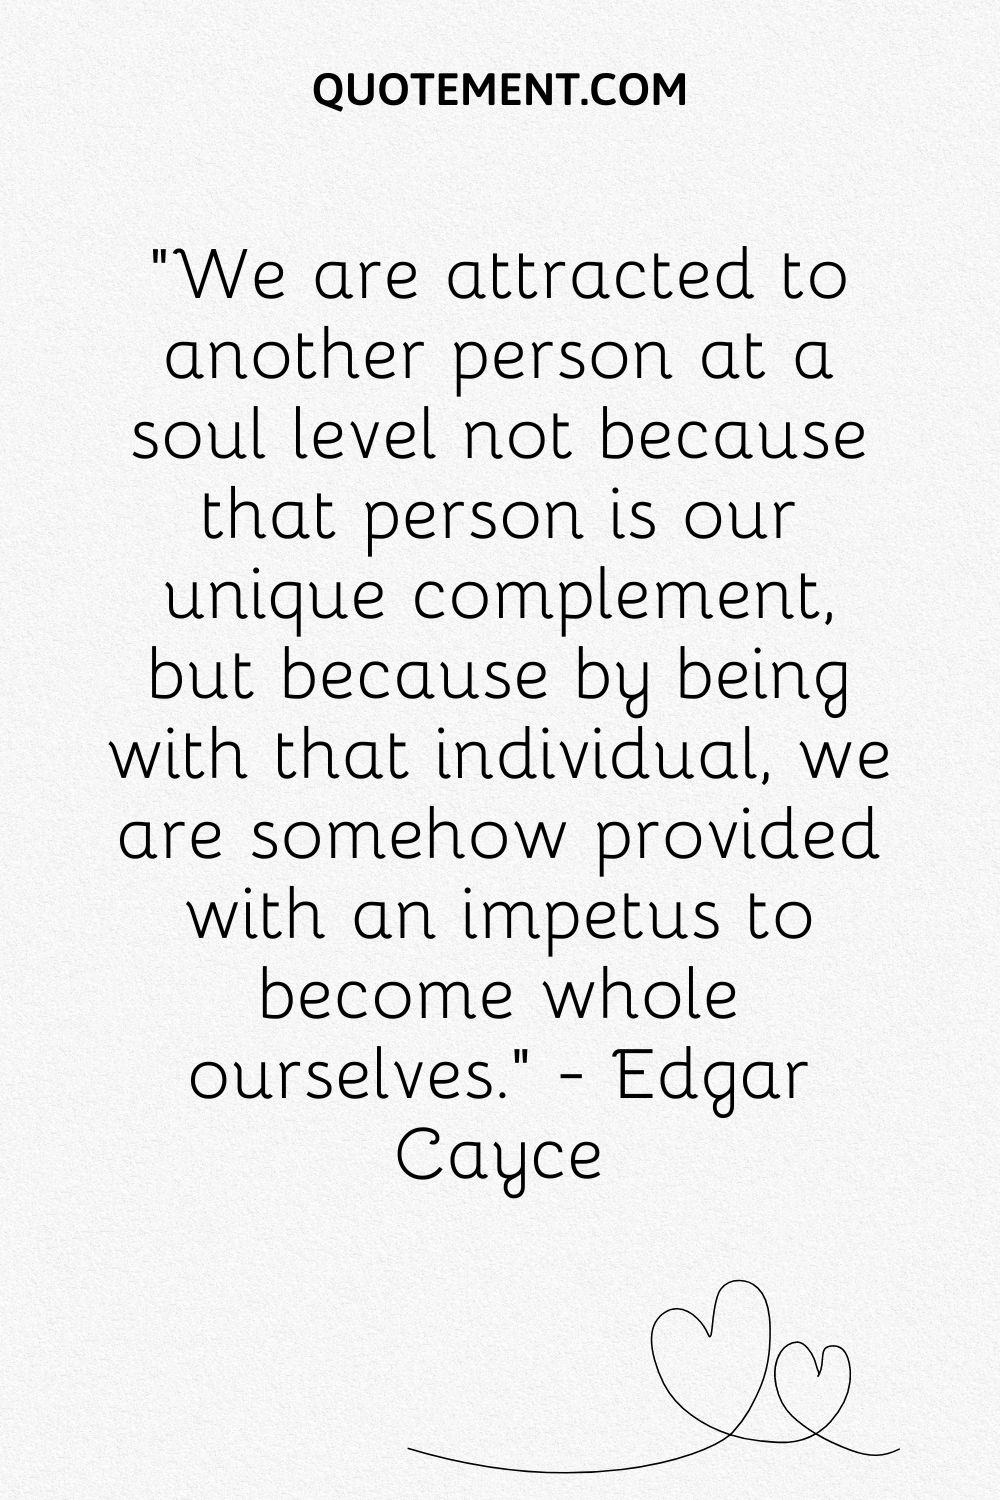 We are attracted to another person at a soul level not because that person is our unique complement